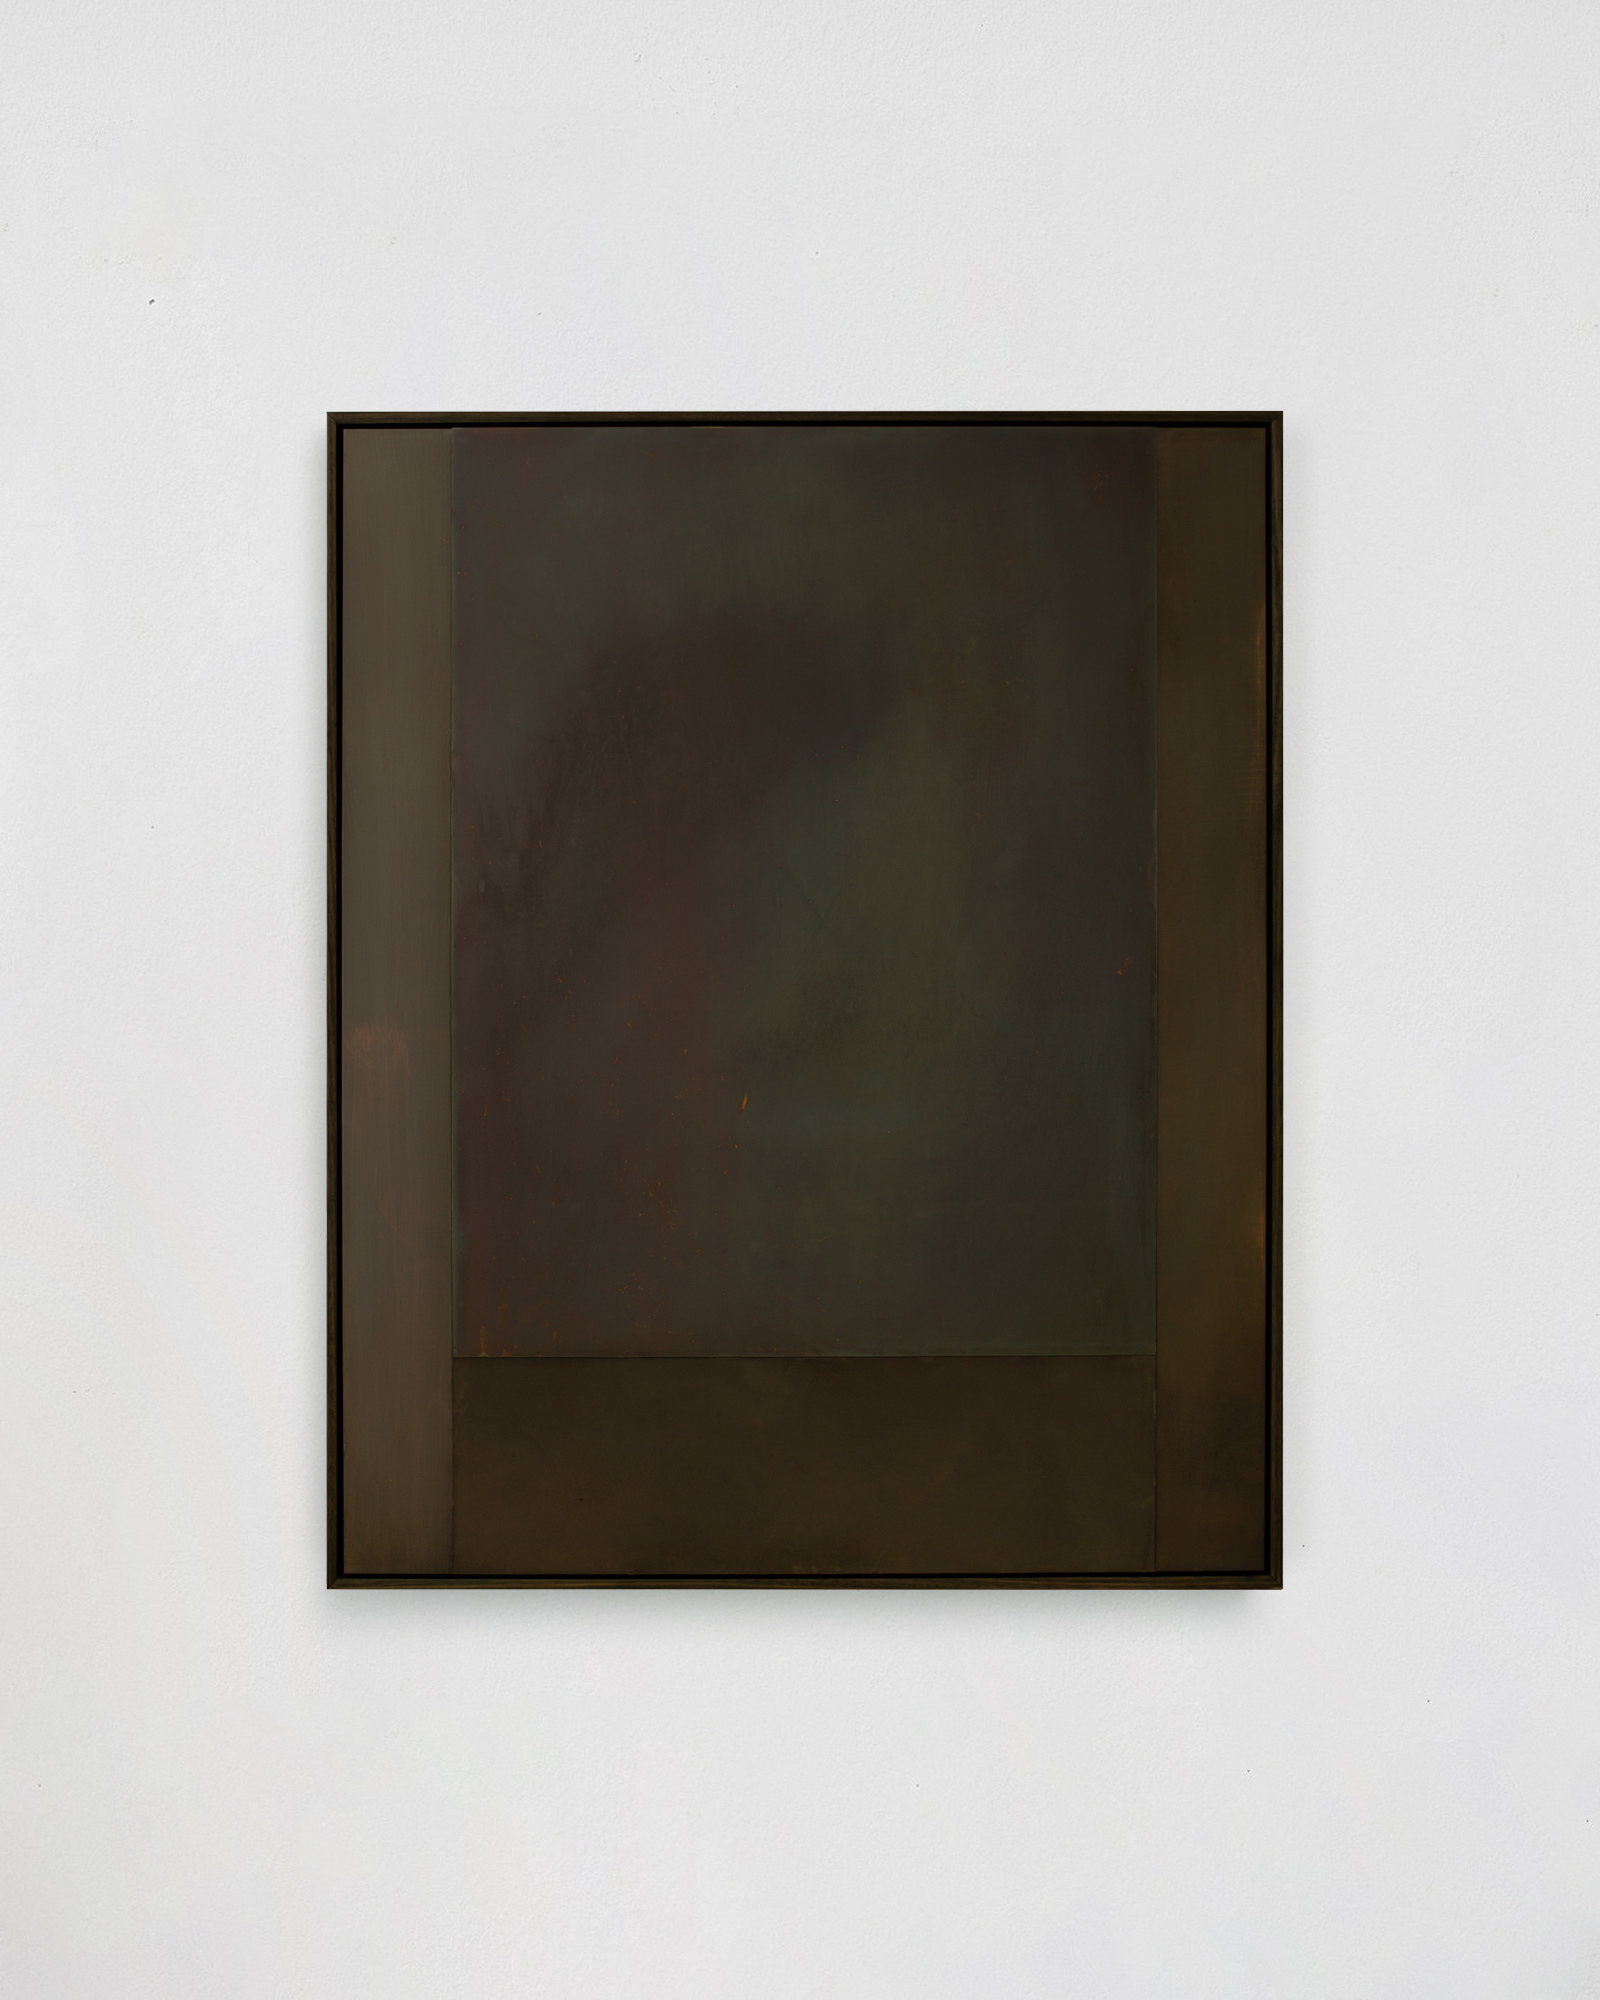 Morgan Stokes, On Becoming 2, 2023, Patinated brass and copper, 93 x 76.6 x 5.5cm, Framed in Tasmanian oak